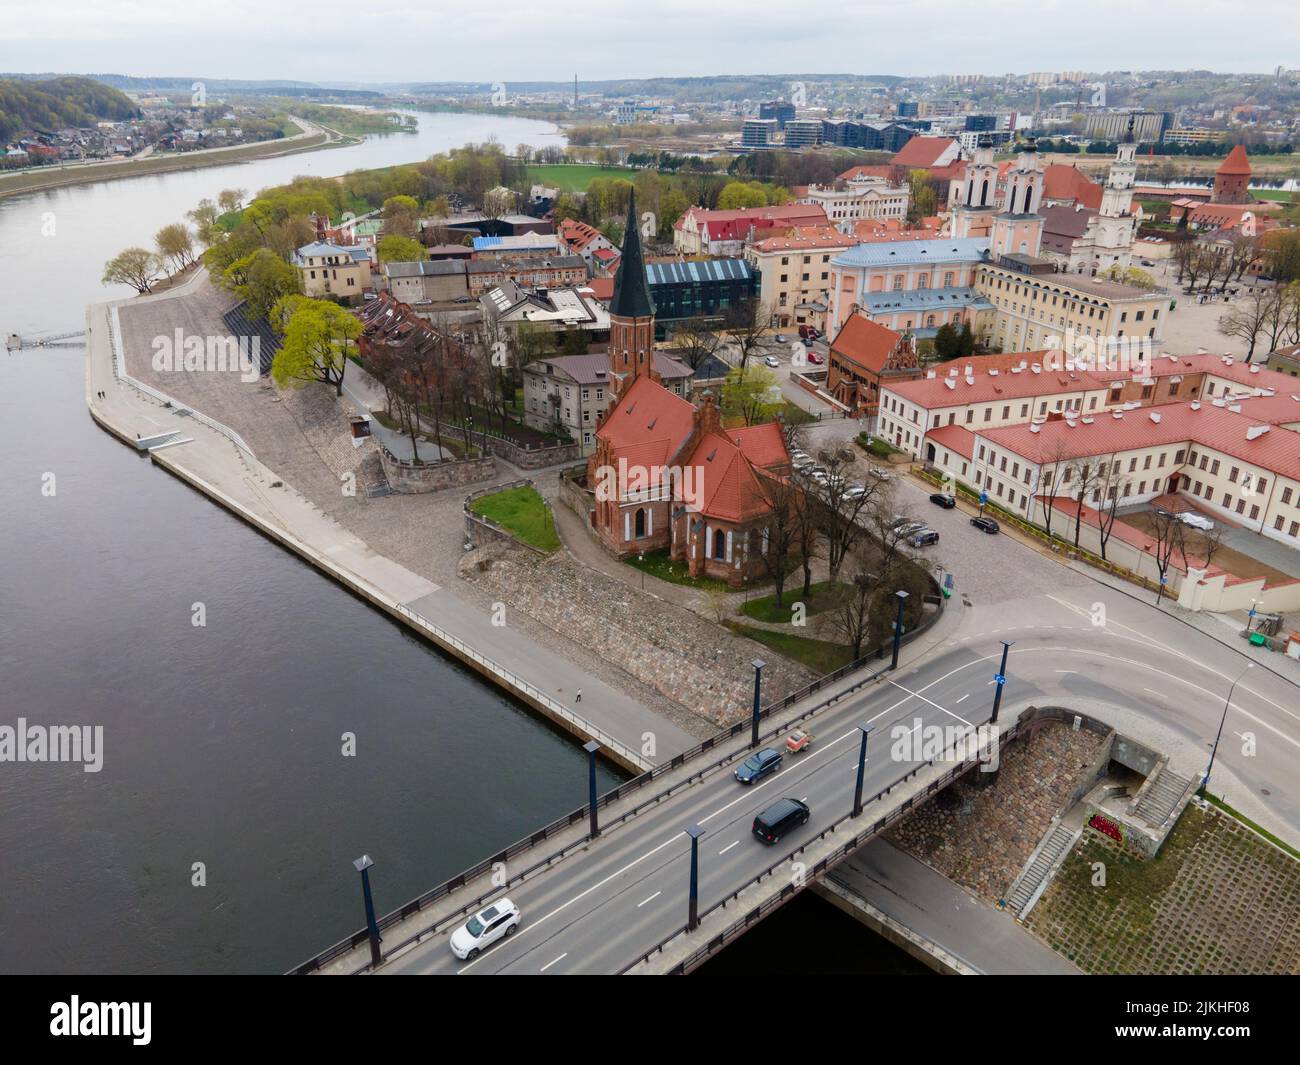 An aerial view of Vytautas the Great Church of the Assumption of the Virgin Mary in Kaunas, Lithuania Stock Photo